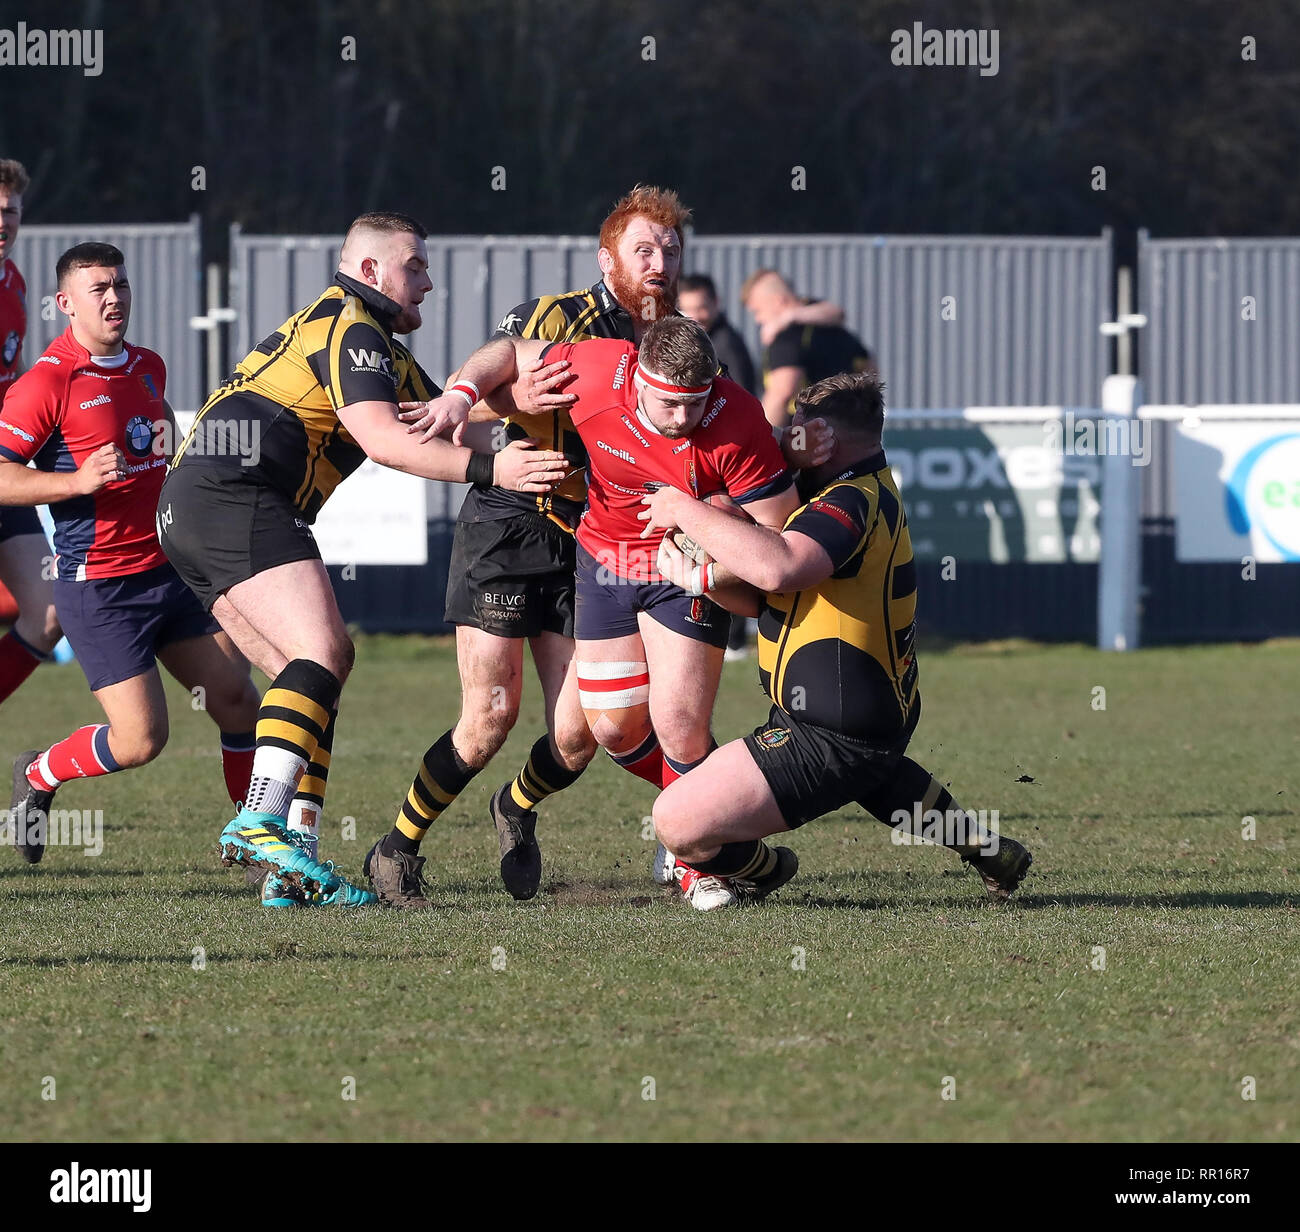 123.02.2019 Hinckley, Leicester, England. Rugby Union, Hinckley rfc v Chester rfc.   Josh Woods on the charge Chester during the RFU National League 2 Stock Photo